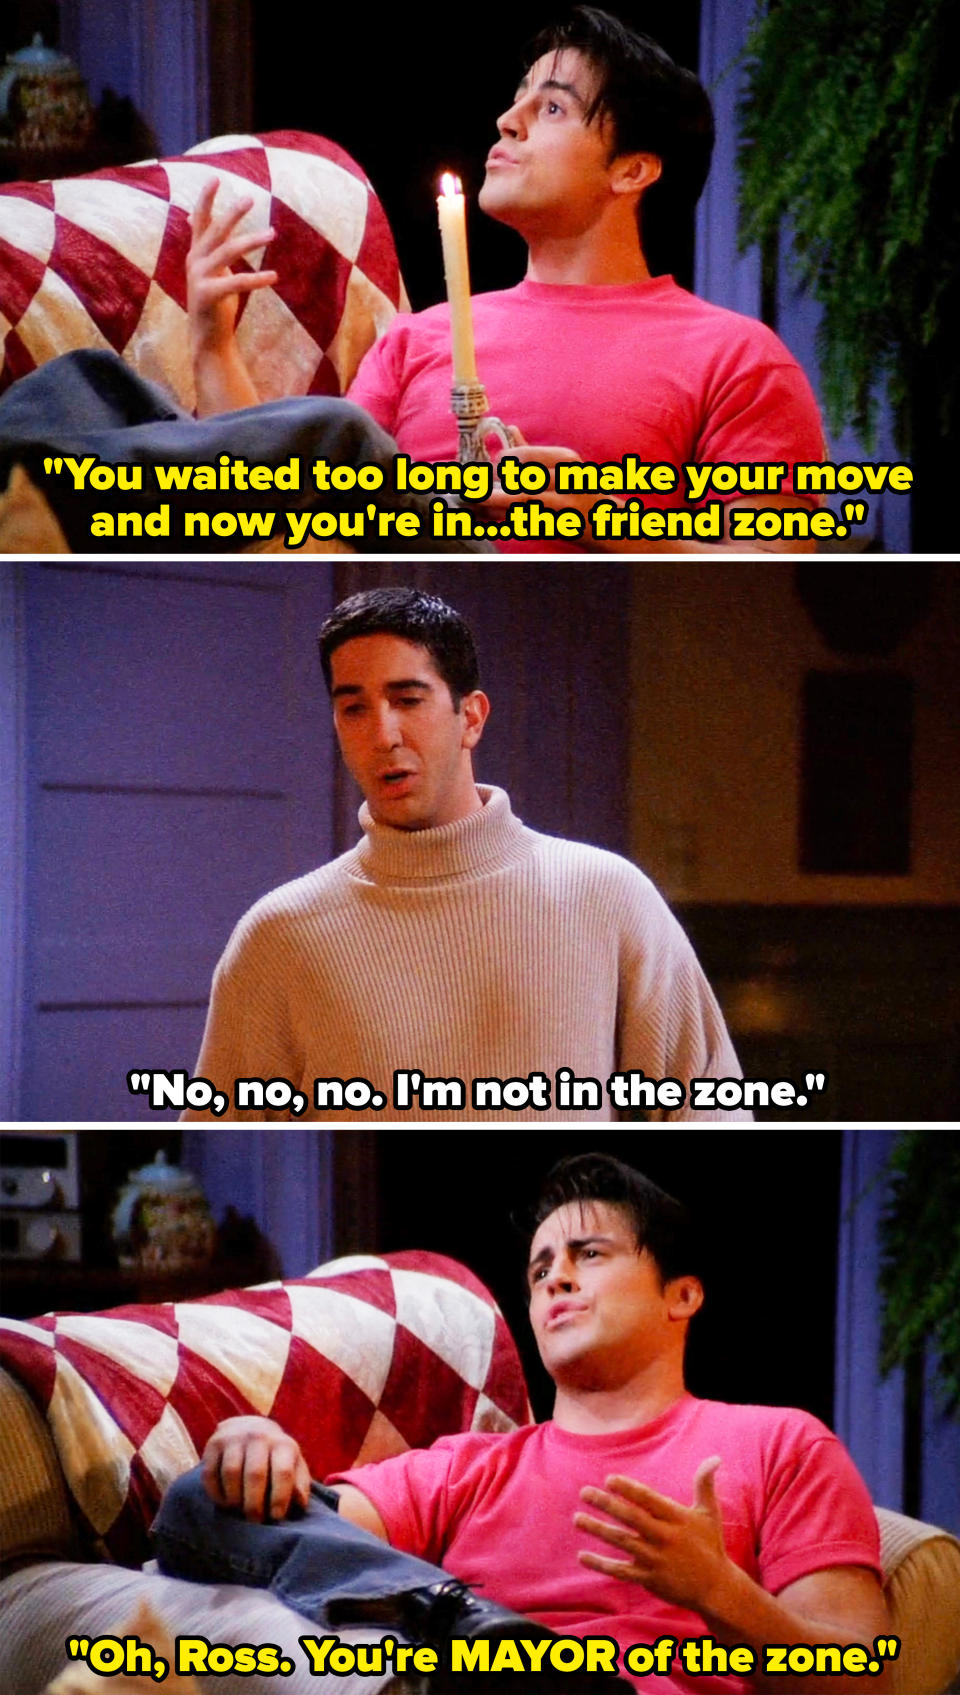 joey telling ross, oh you're mayor of the zone